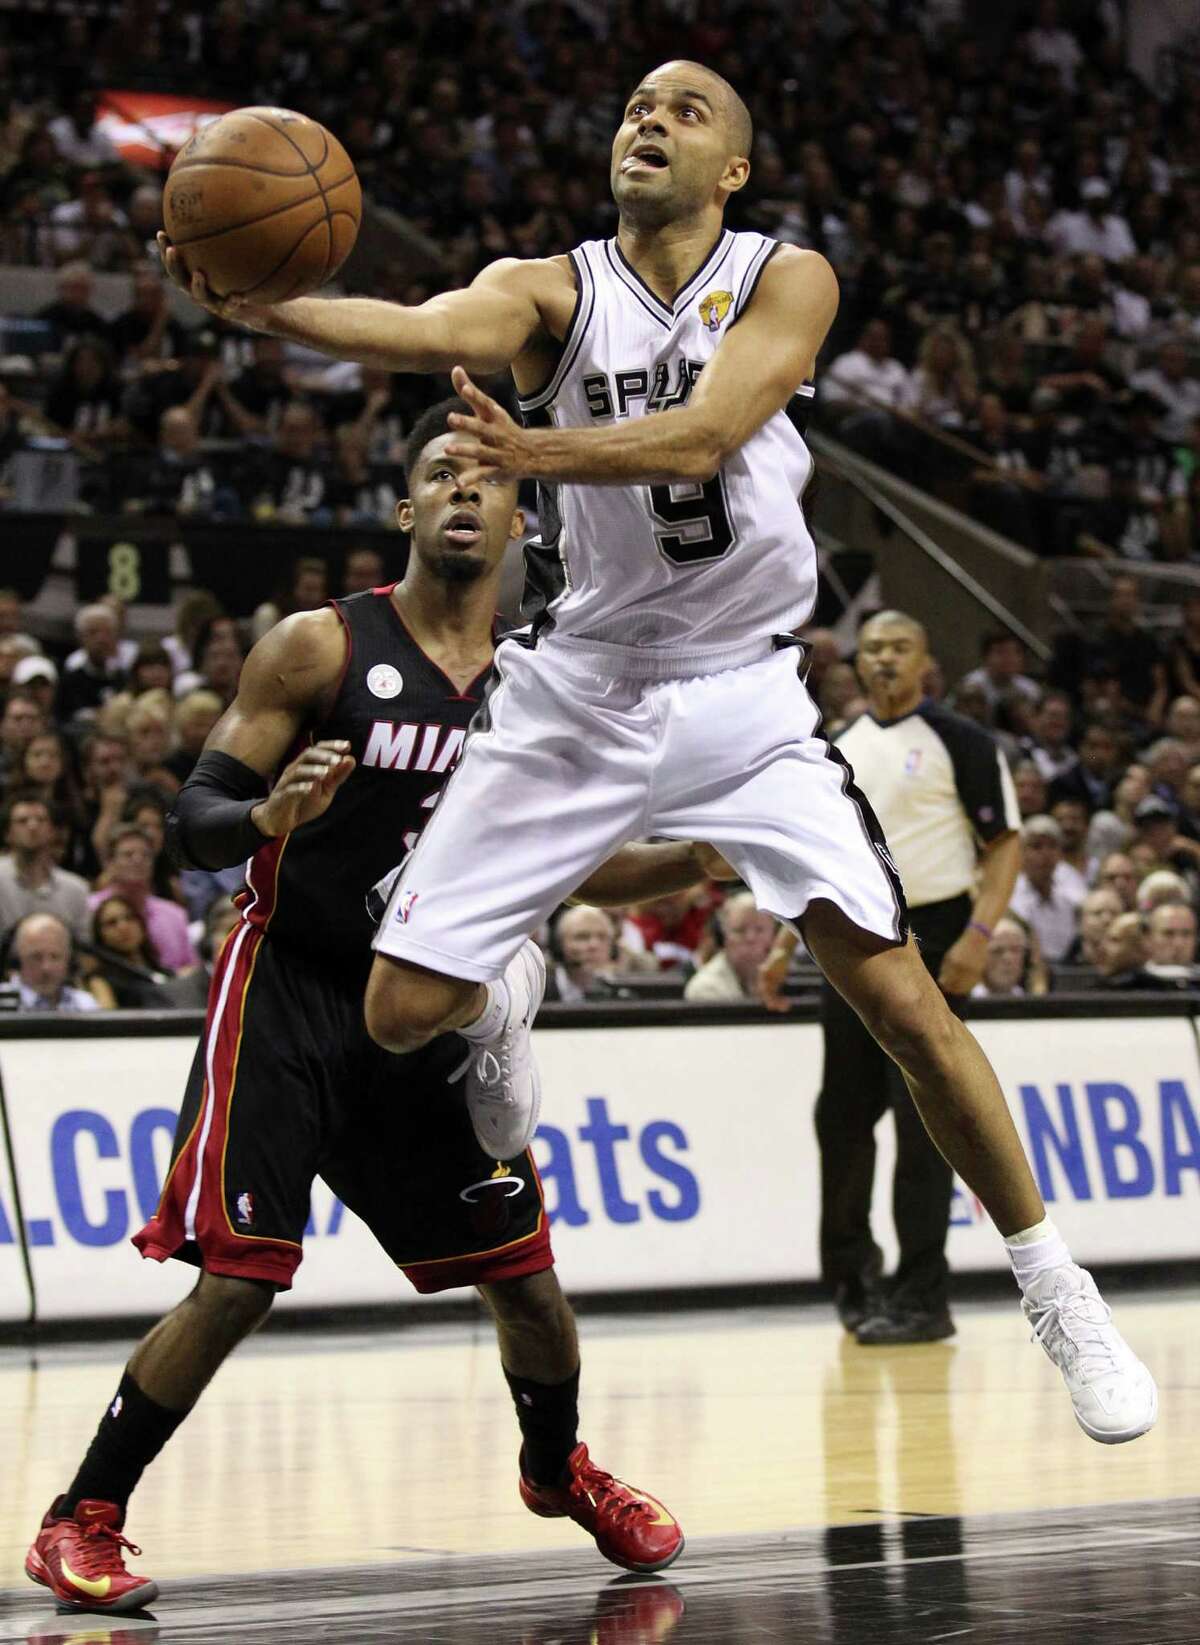 San Antonio Spurs' Tony Parker shoots over Miami Heat's Norris Cole during the first half of Game 5 of the NBA Finals at the AT&T Center on Sunday, June 16, 2013. (Kin Man Hui/San Antonio Express-News)